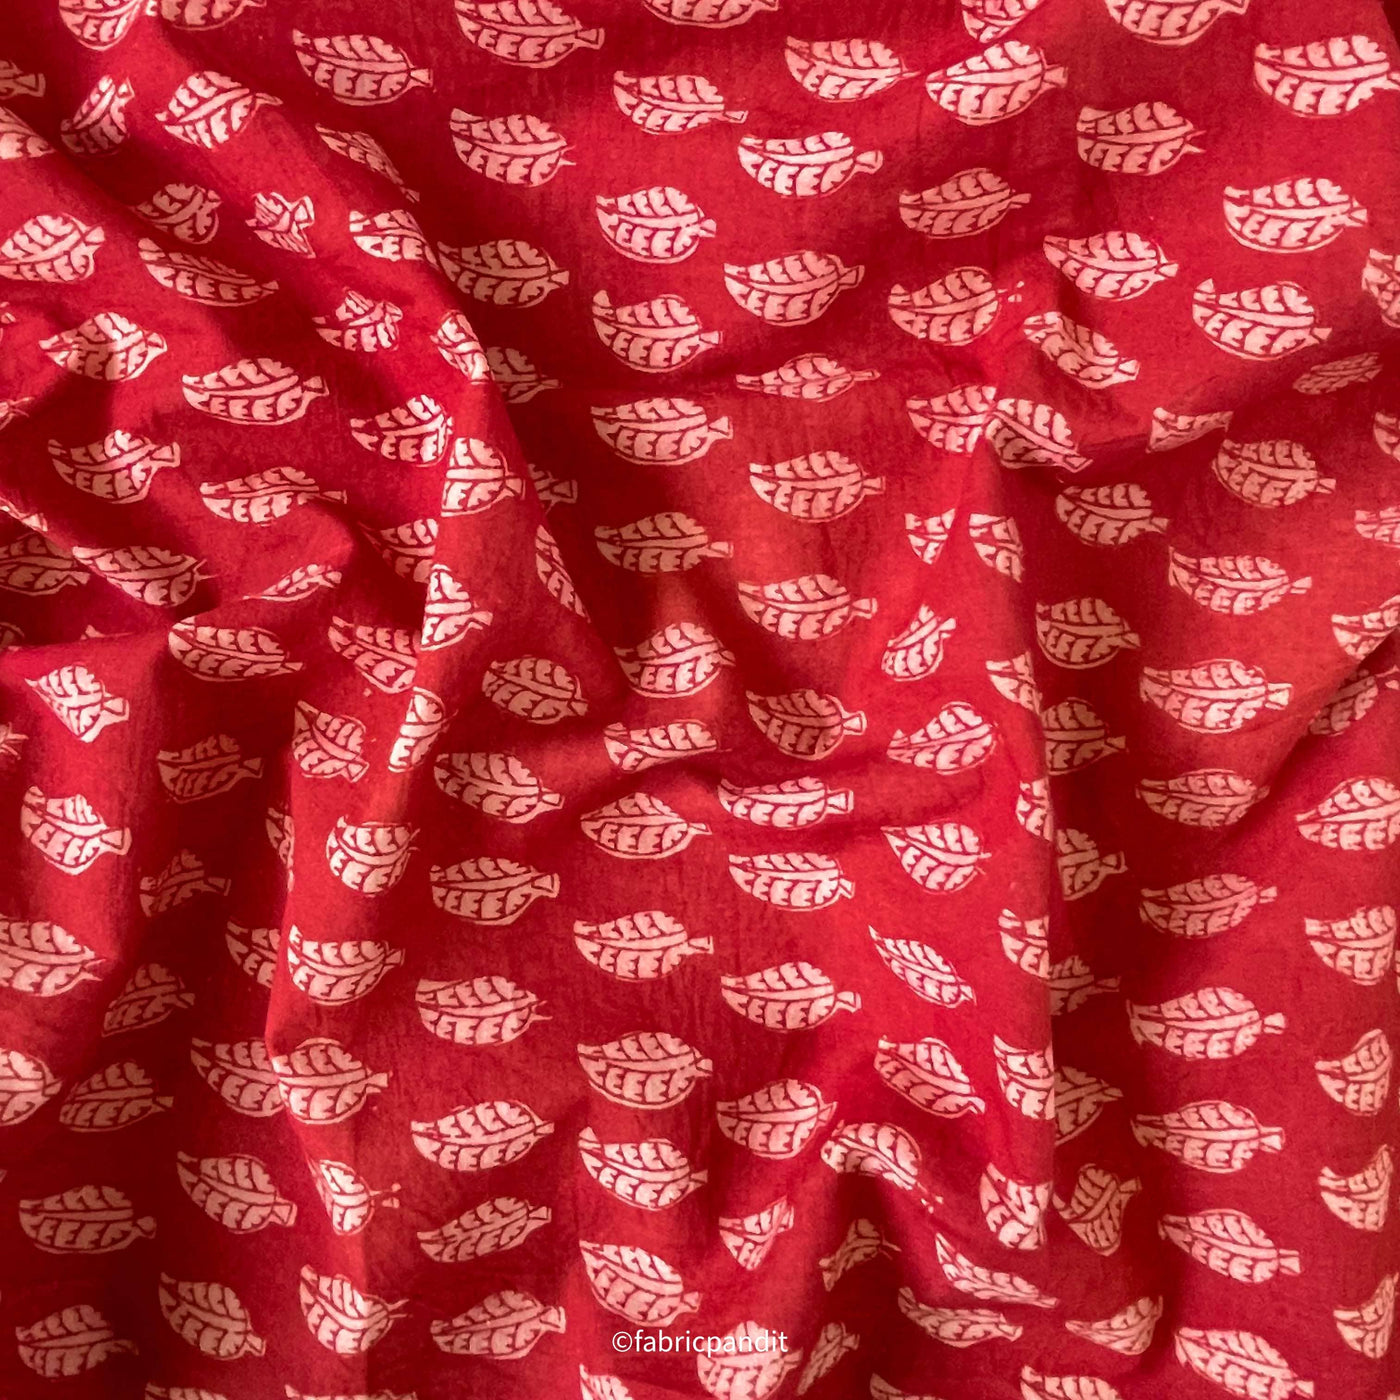 Hand Block Printed Cotton Fabric Cut Piece (CUT PIECE) Deep Saffron Mini Leaves Hand Block Printed Pure Cotton Fabric (Width 42 inches)